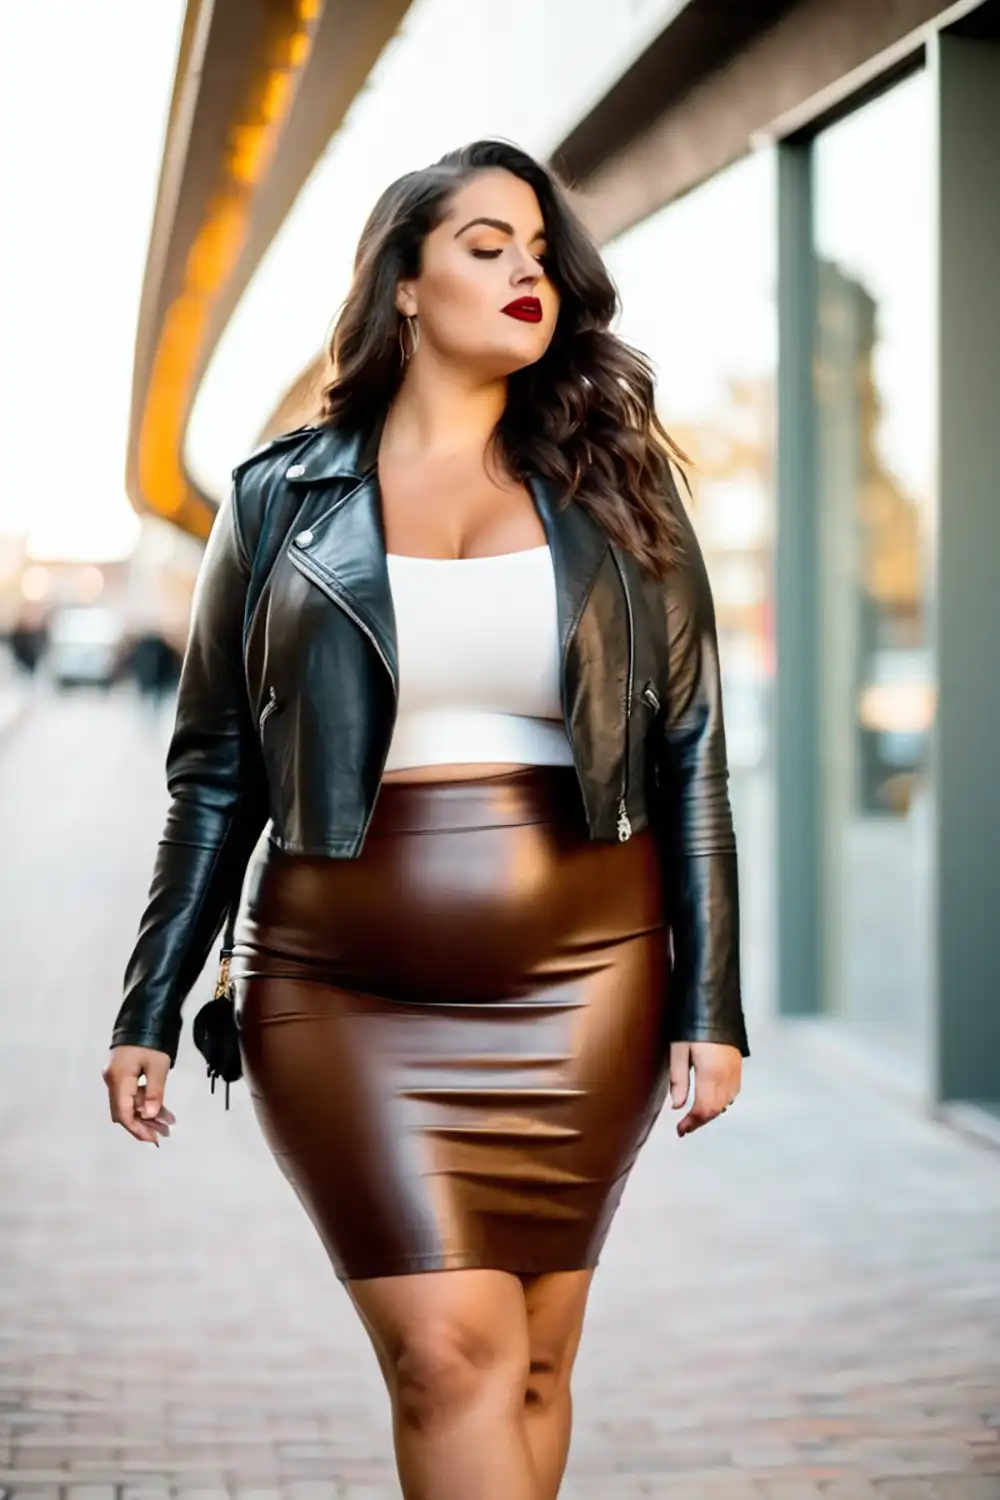 Girl wearing skirt with soft leather jacket